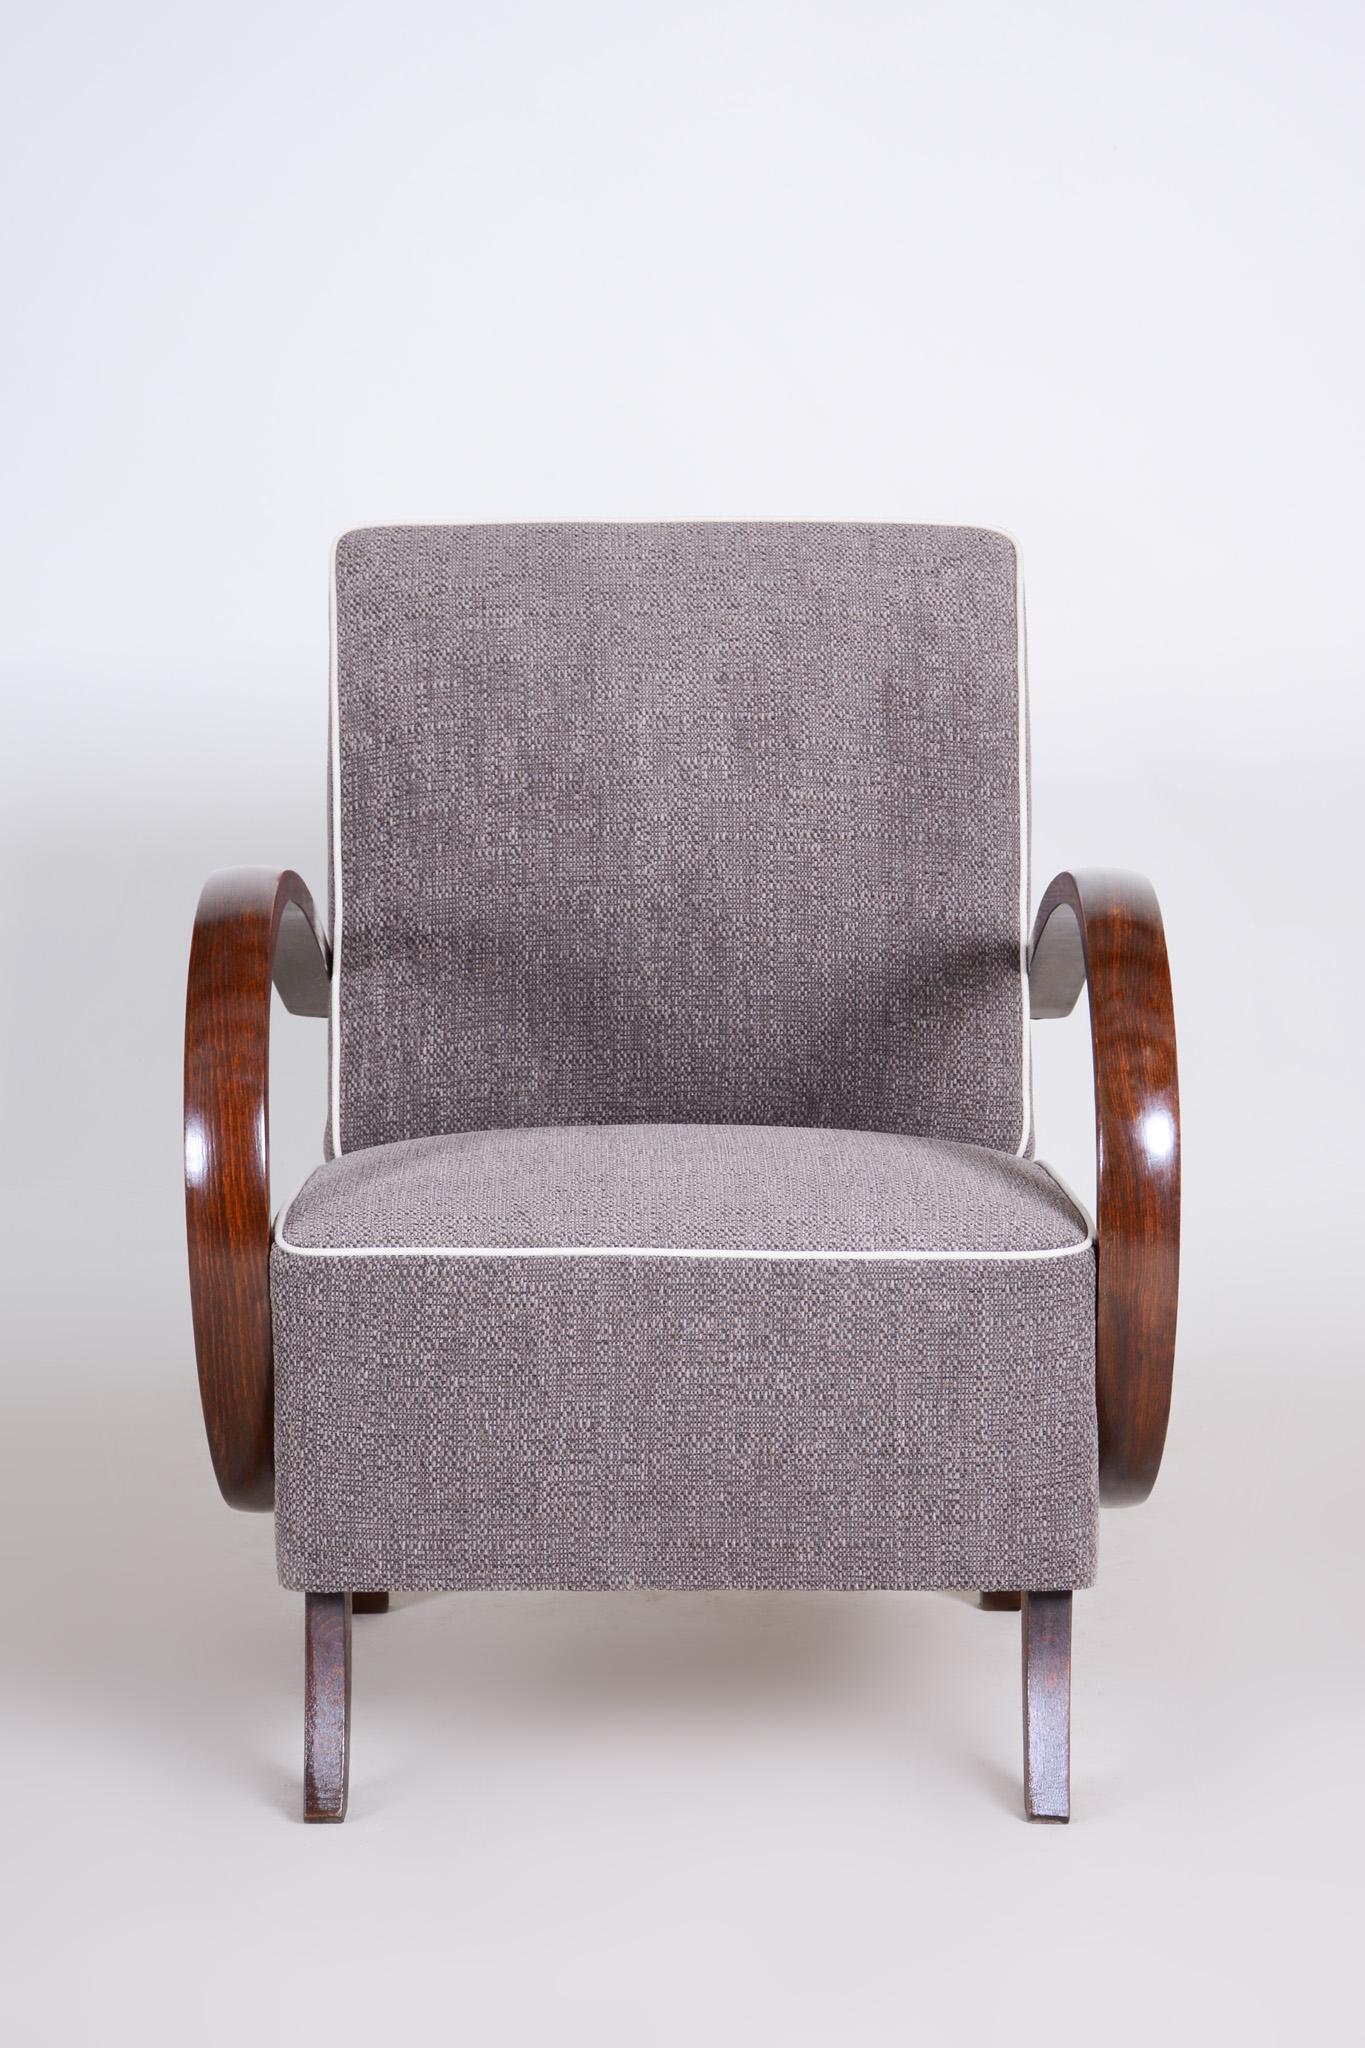 Pair of Grey Art Deco Armchairs Made in the 1930s, Fully Refurbished Beech For Sale 3